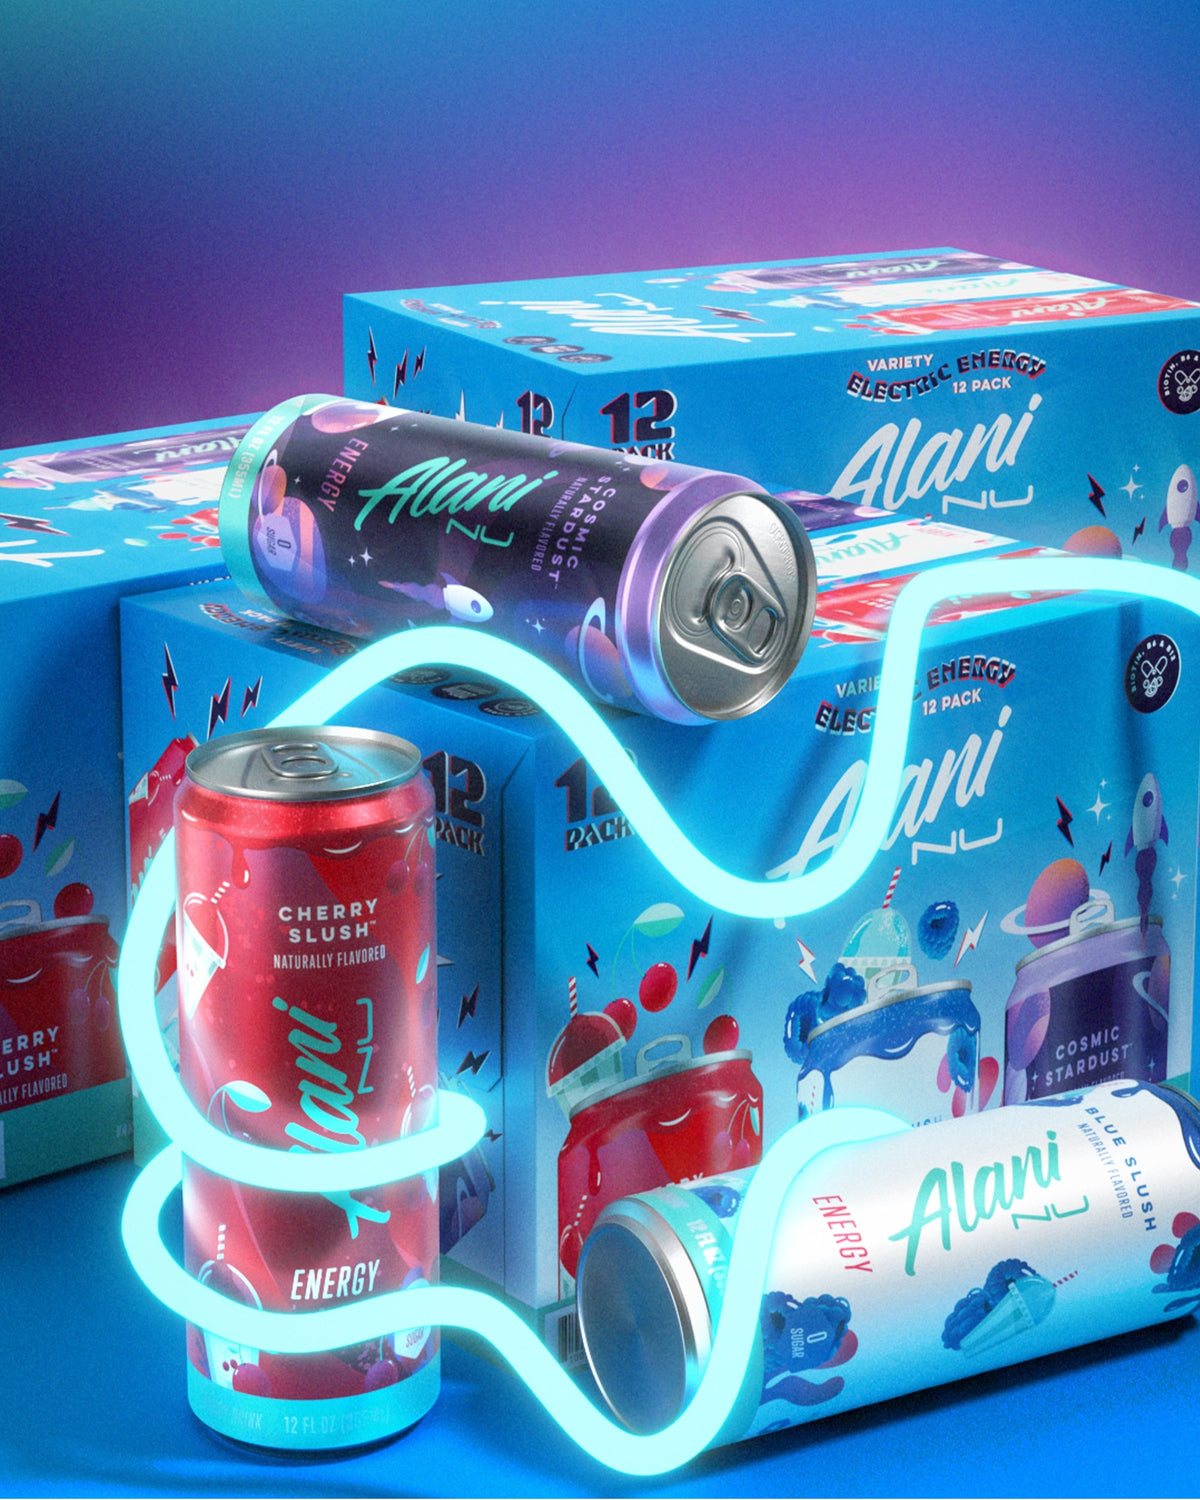 three cans of Alani Nu Electric Energy sitting next to each other by a 12pk box of Alani Nu Electric Energy.